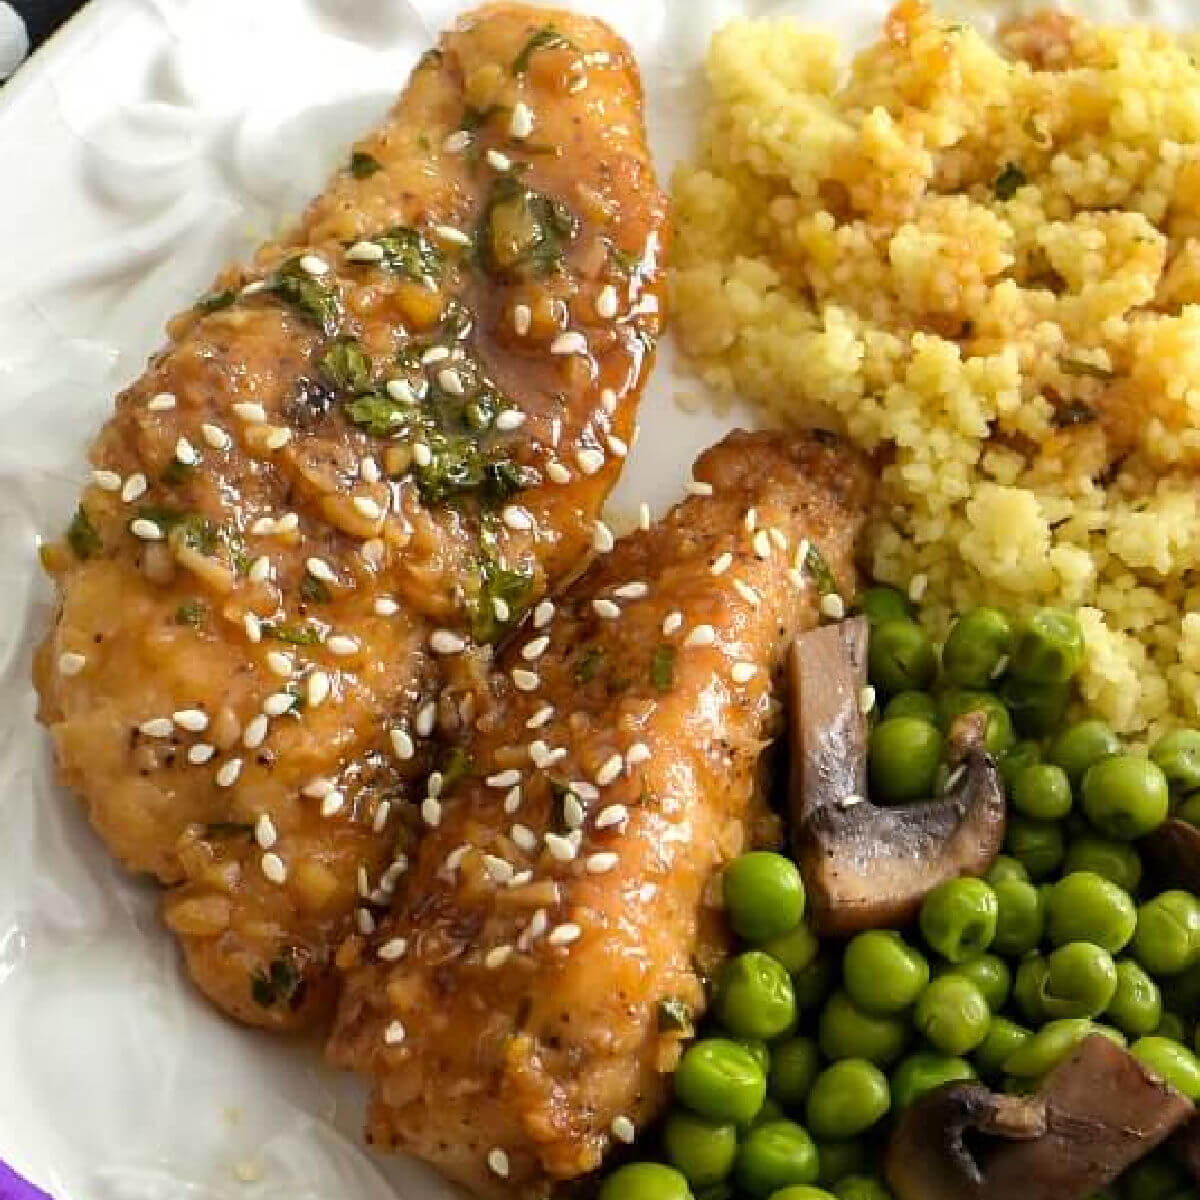 A white plate holds two pieces of honey garlic chicken , green peas with mushrooms, and golden quinoa with honey sauce drizzled on top. Surrounding the plate are 5 purple blossoms and at the upper left hand side is a black napkin with white and gold fleur de lis.